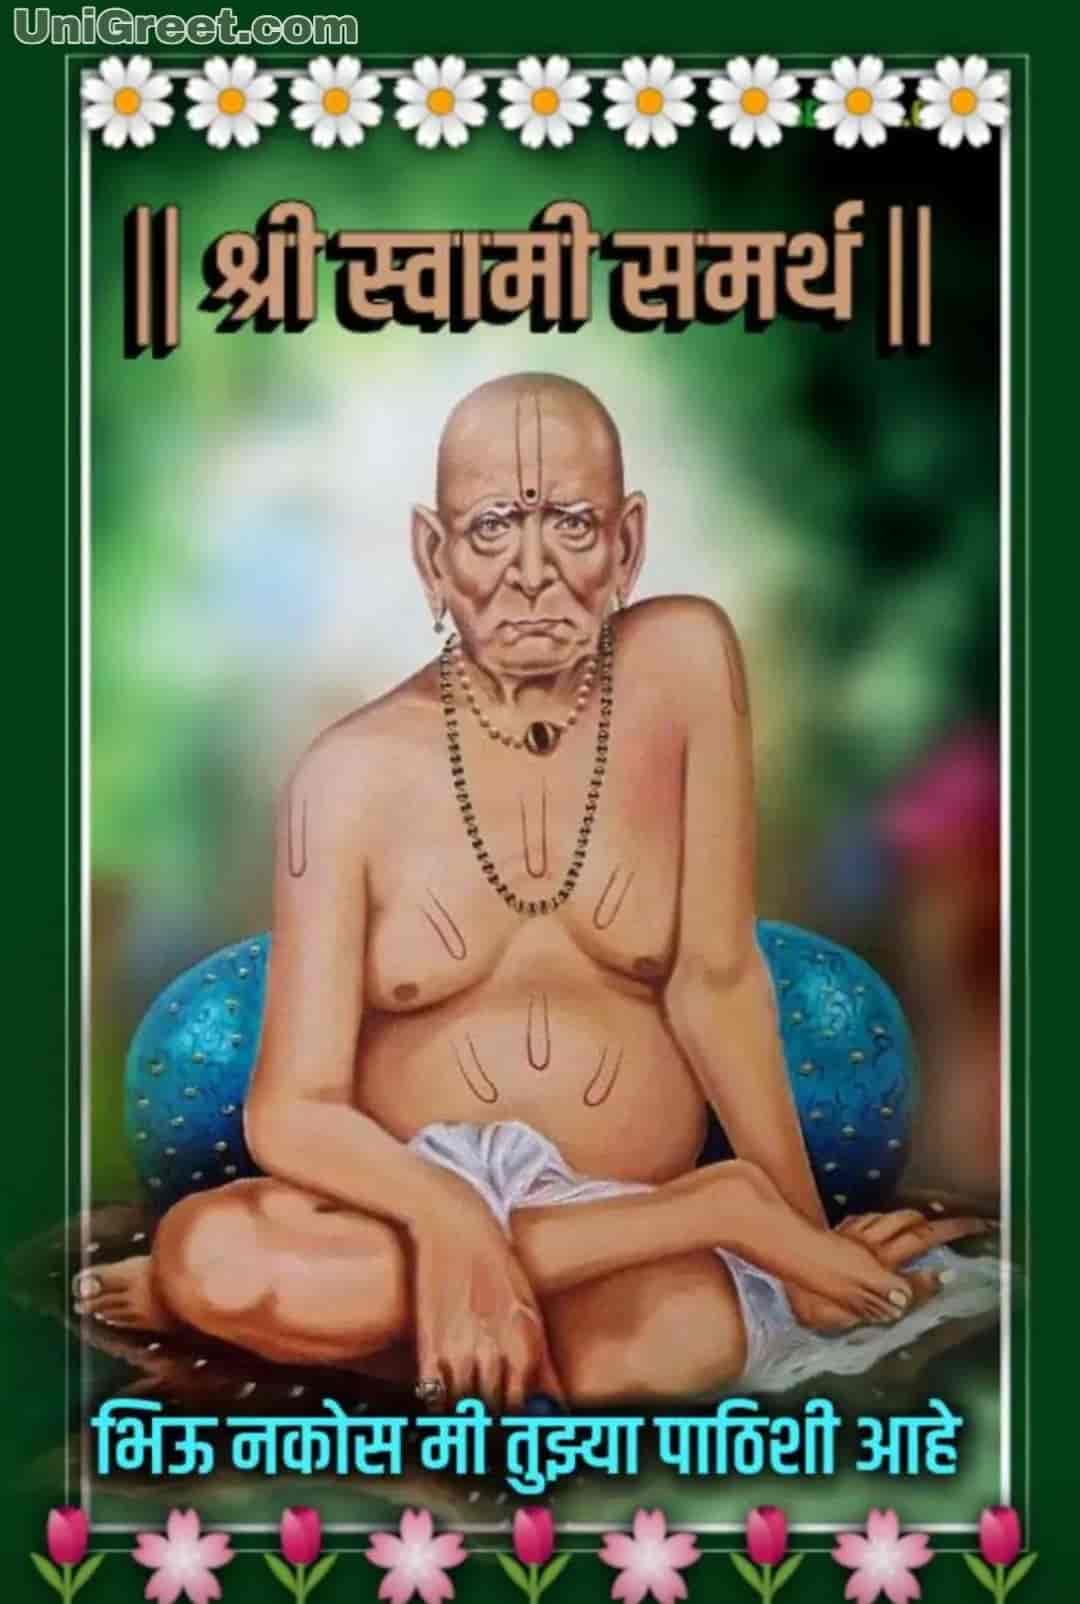 Best 👌 Shree Swami Samarth Images Wallpapers Quotes Status Photos